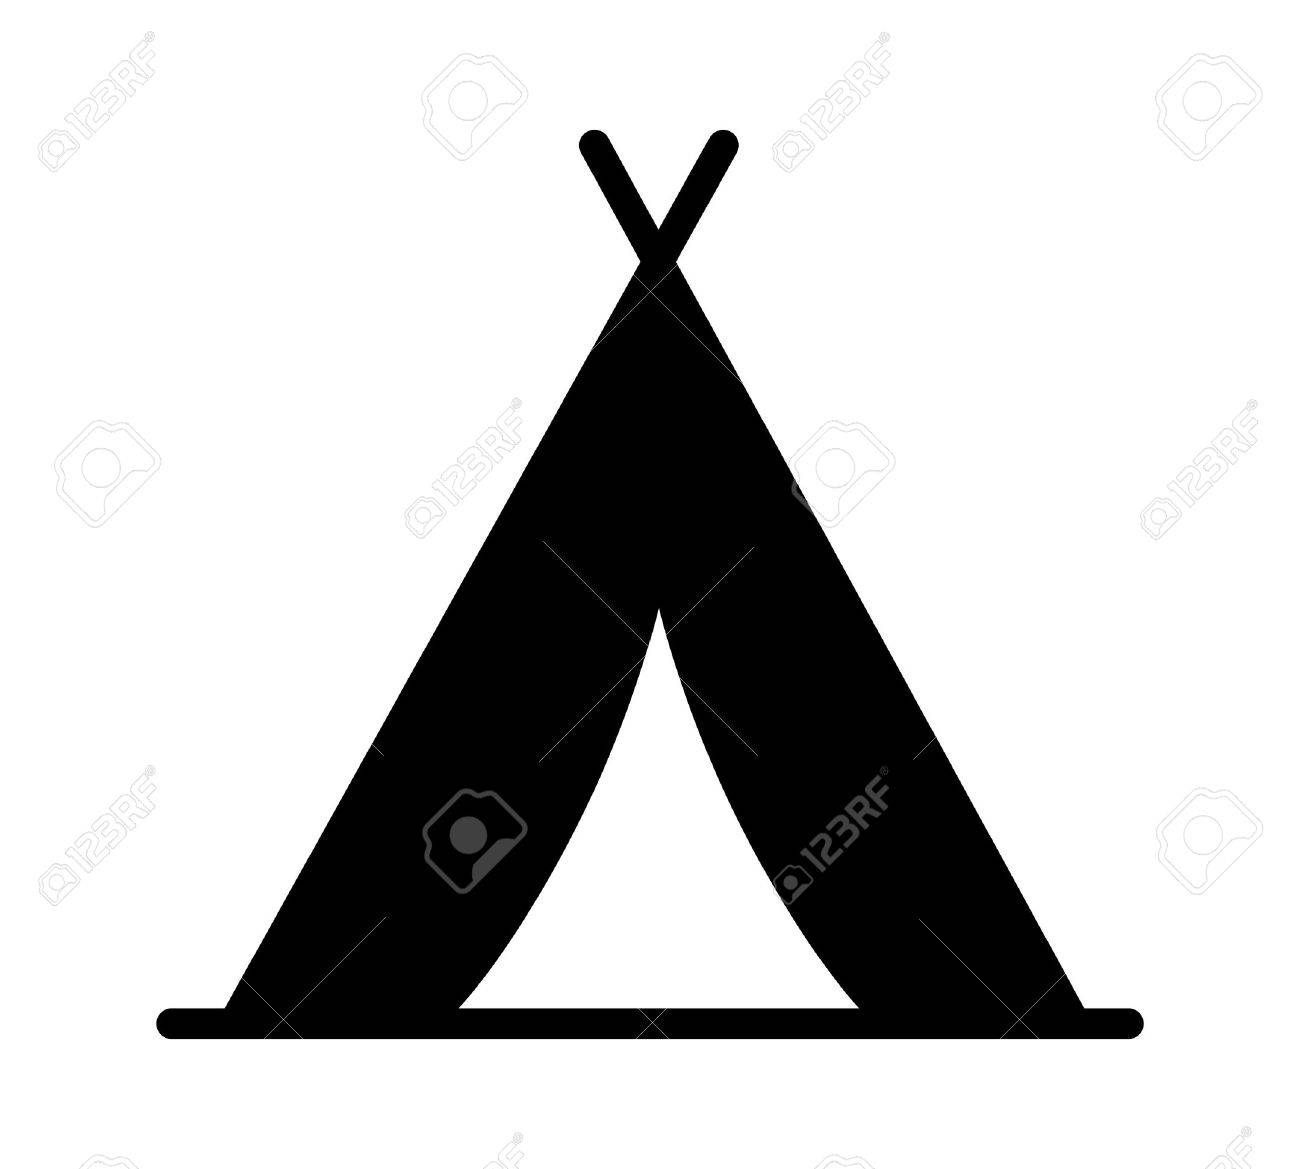 Wigwam Icon. Indian Teepee Or Tipi. Vector Stock Illustration 